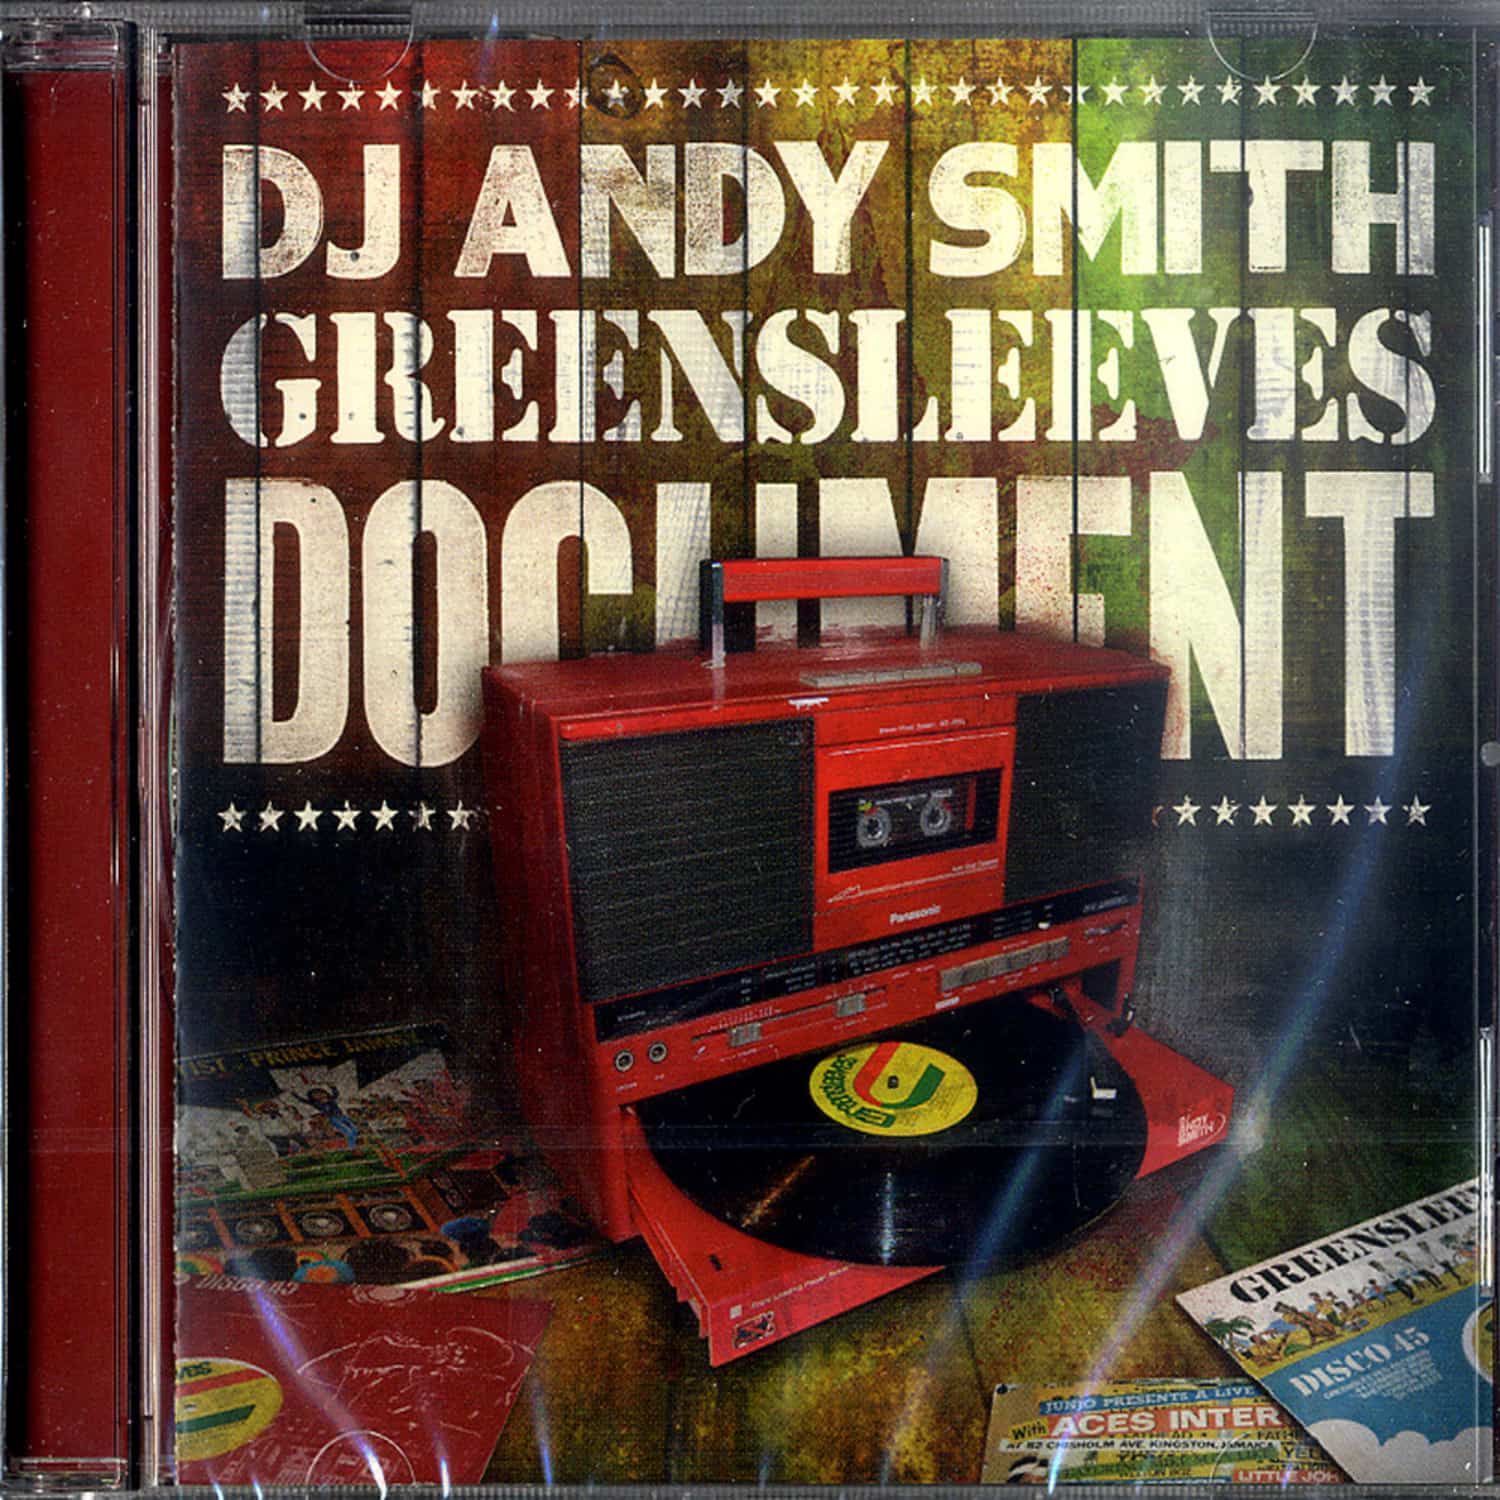 DJ Andy Smith - GREENSLEEVES DOCUMENT 